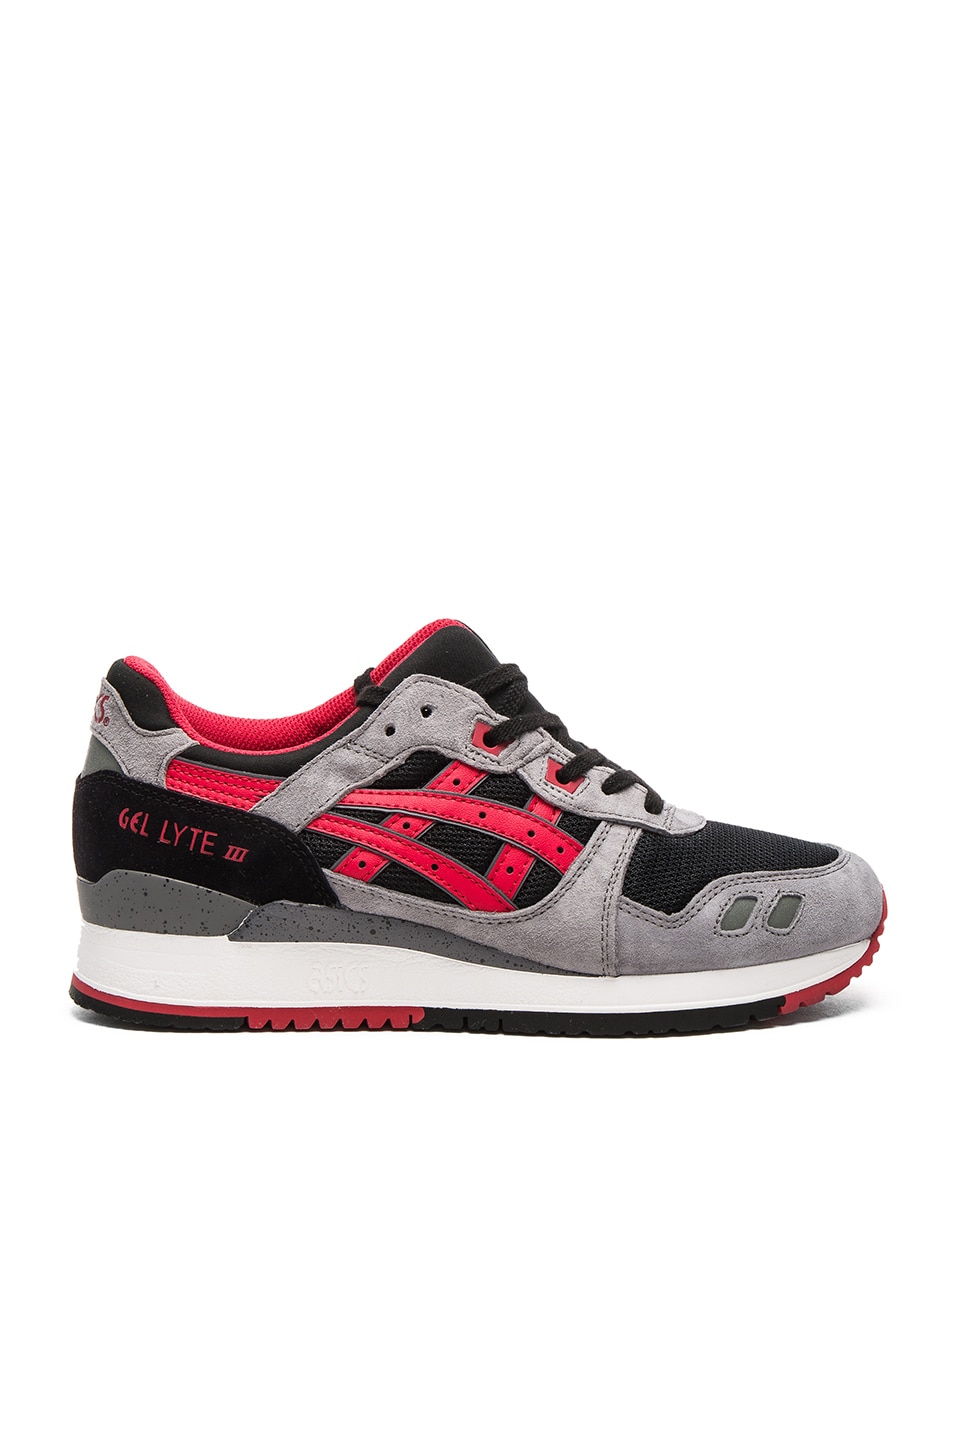 black and red asics gel lyte iii